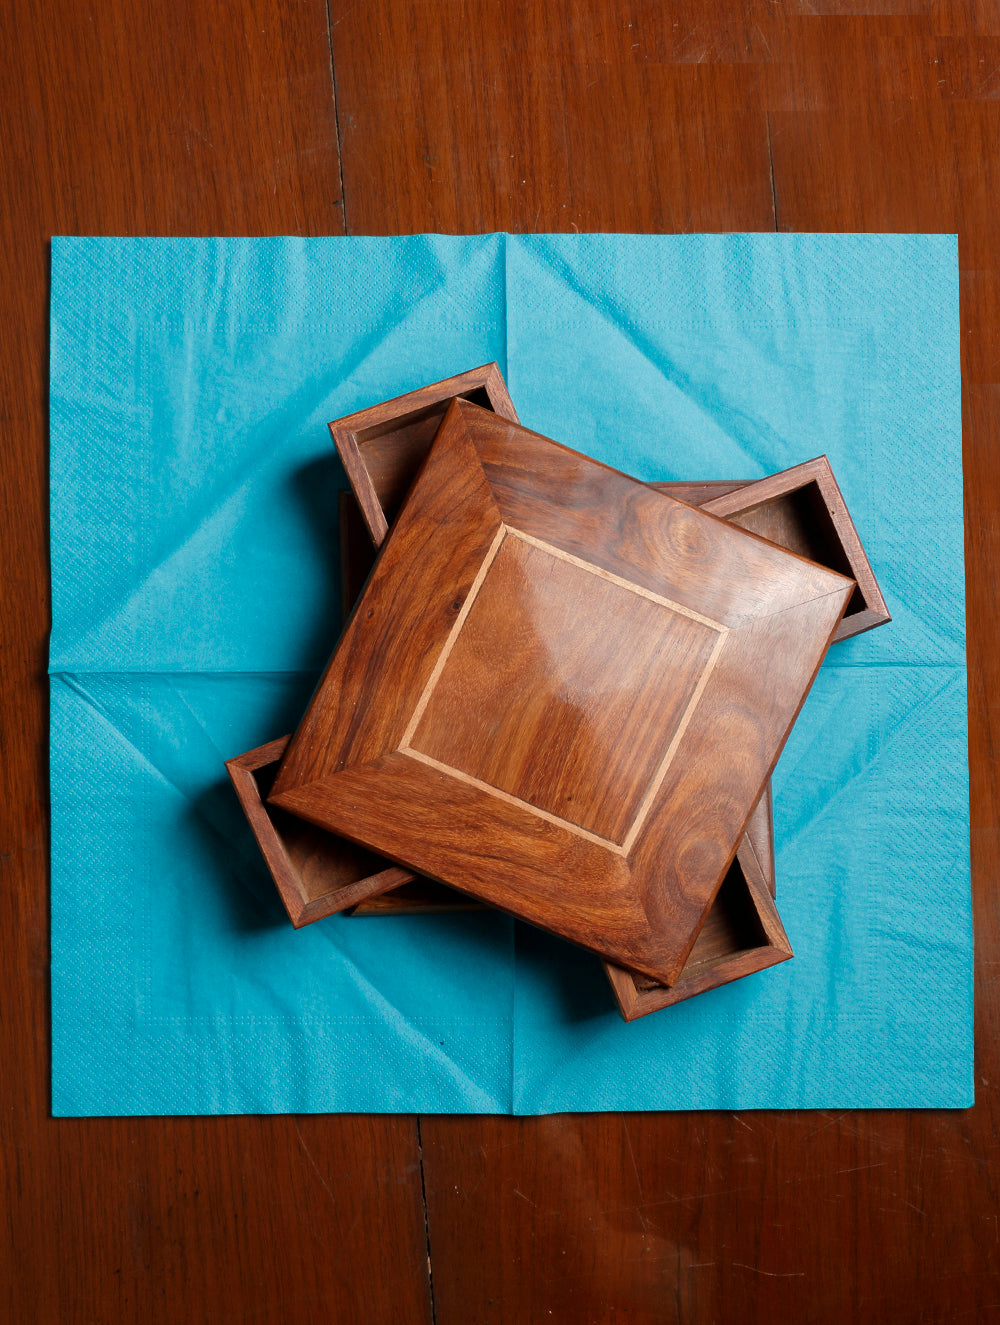 Load image into Gallery viewer, Wooden Decorative Utility Box - The India Craft House 